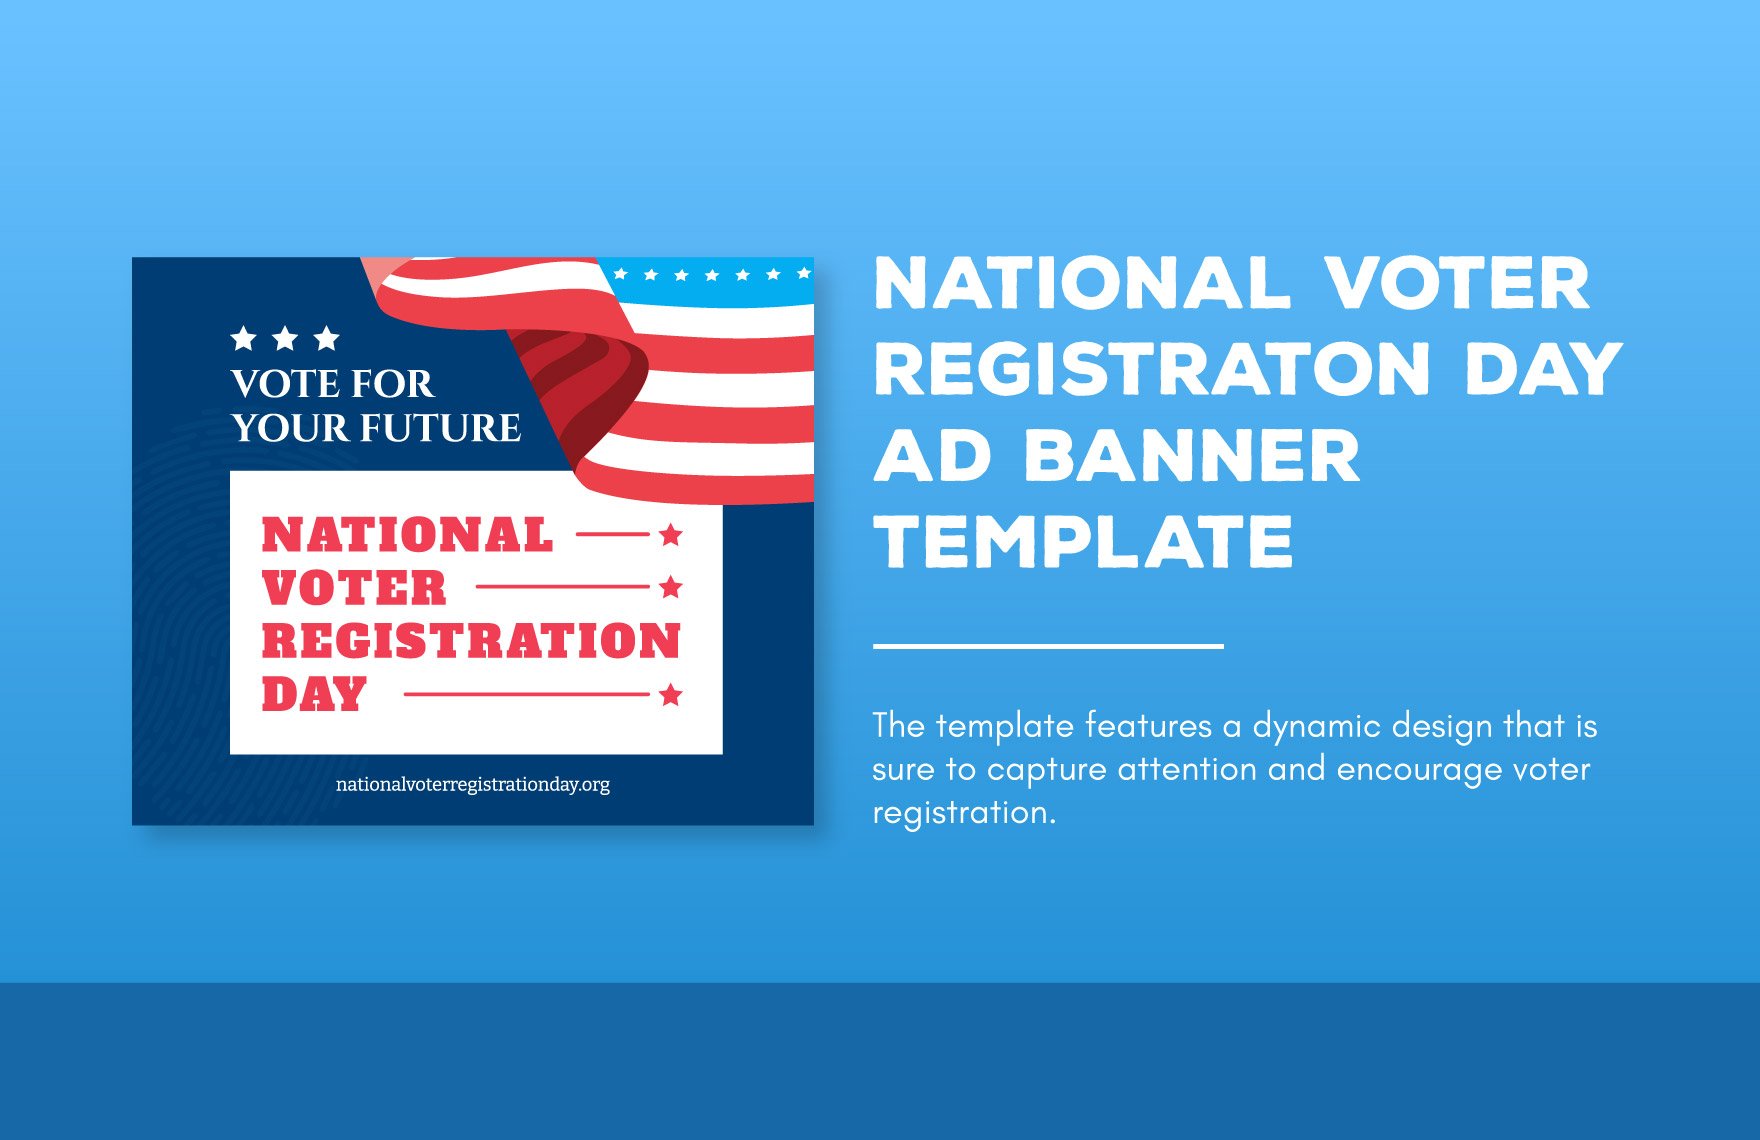 Free National Voter Registration Day Ad Banner Template in Illustrator, PSD, PNG